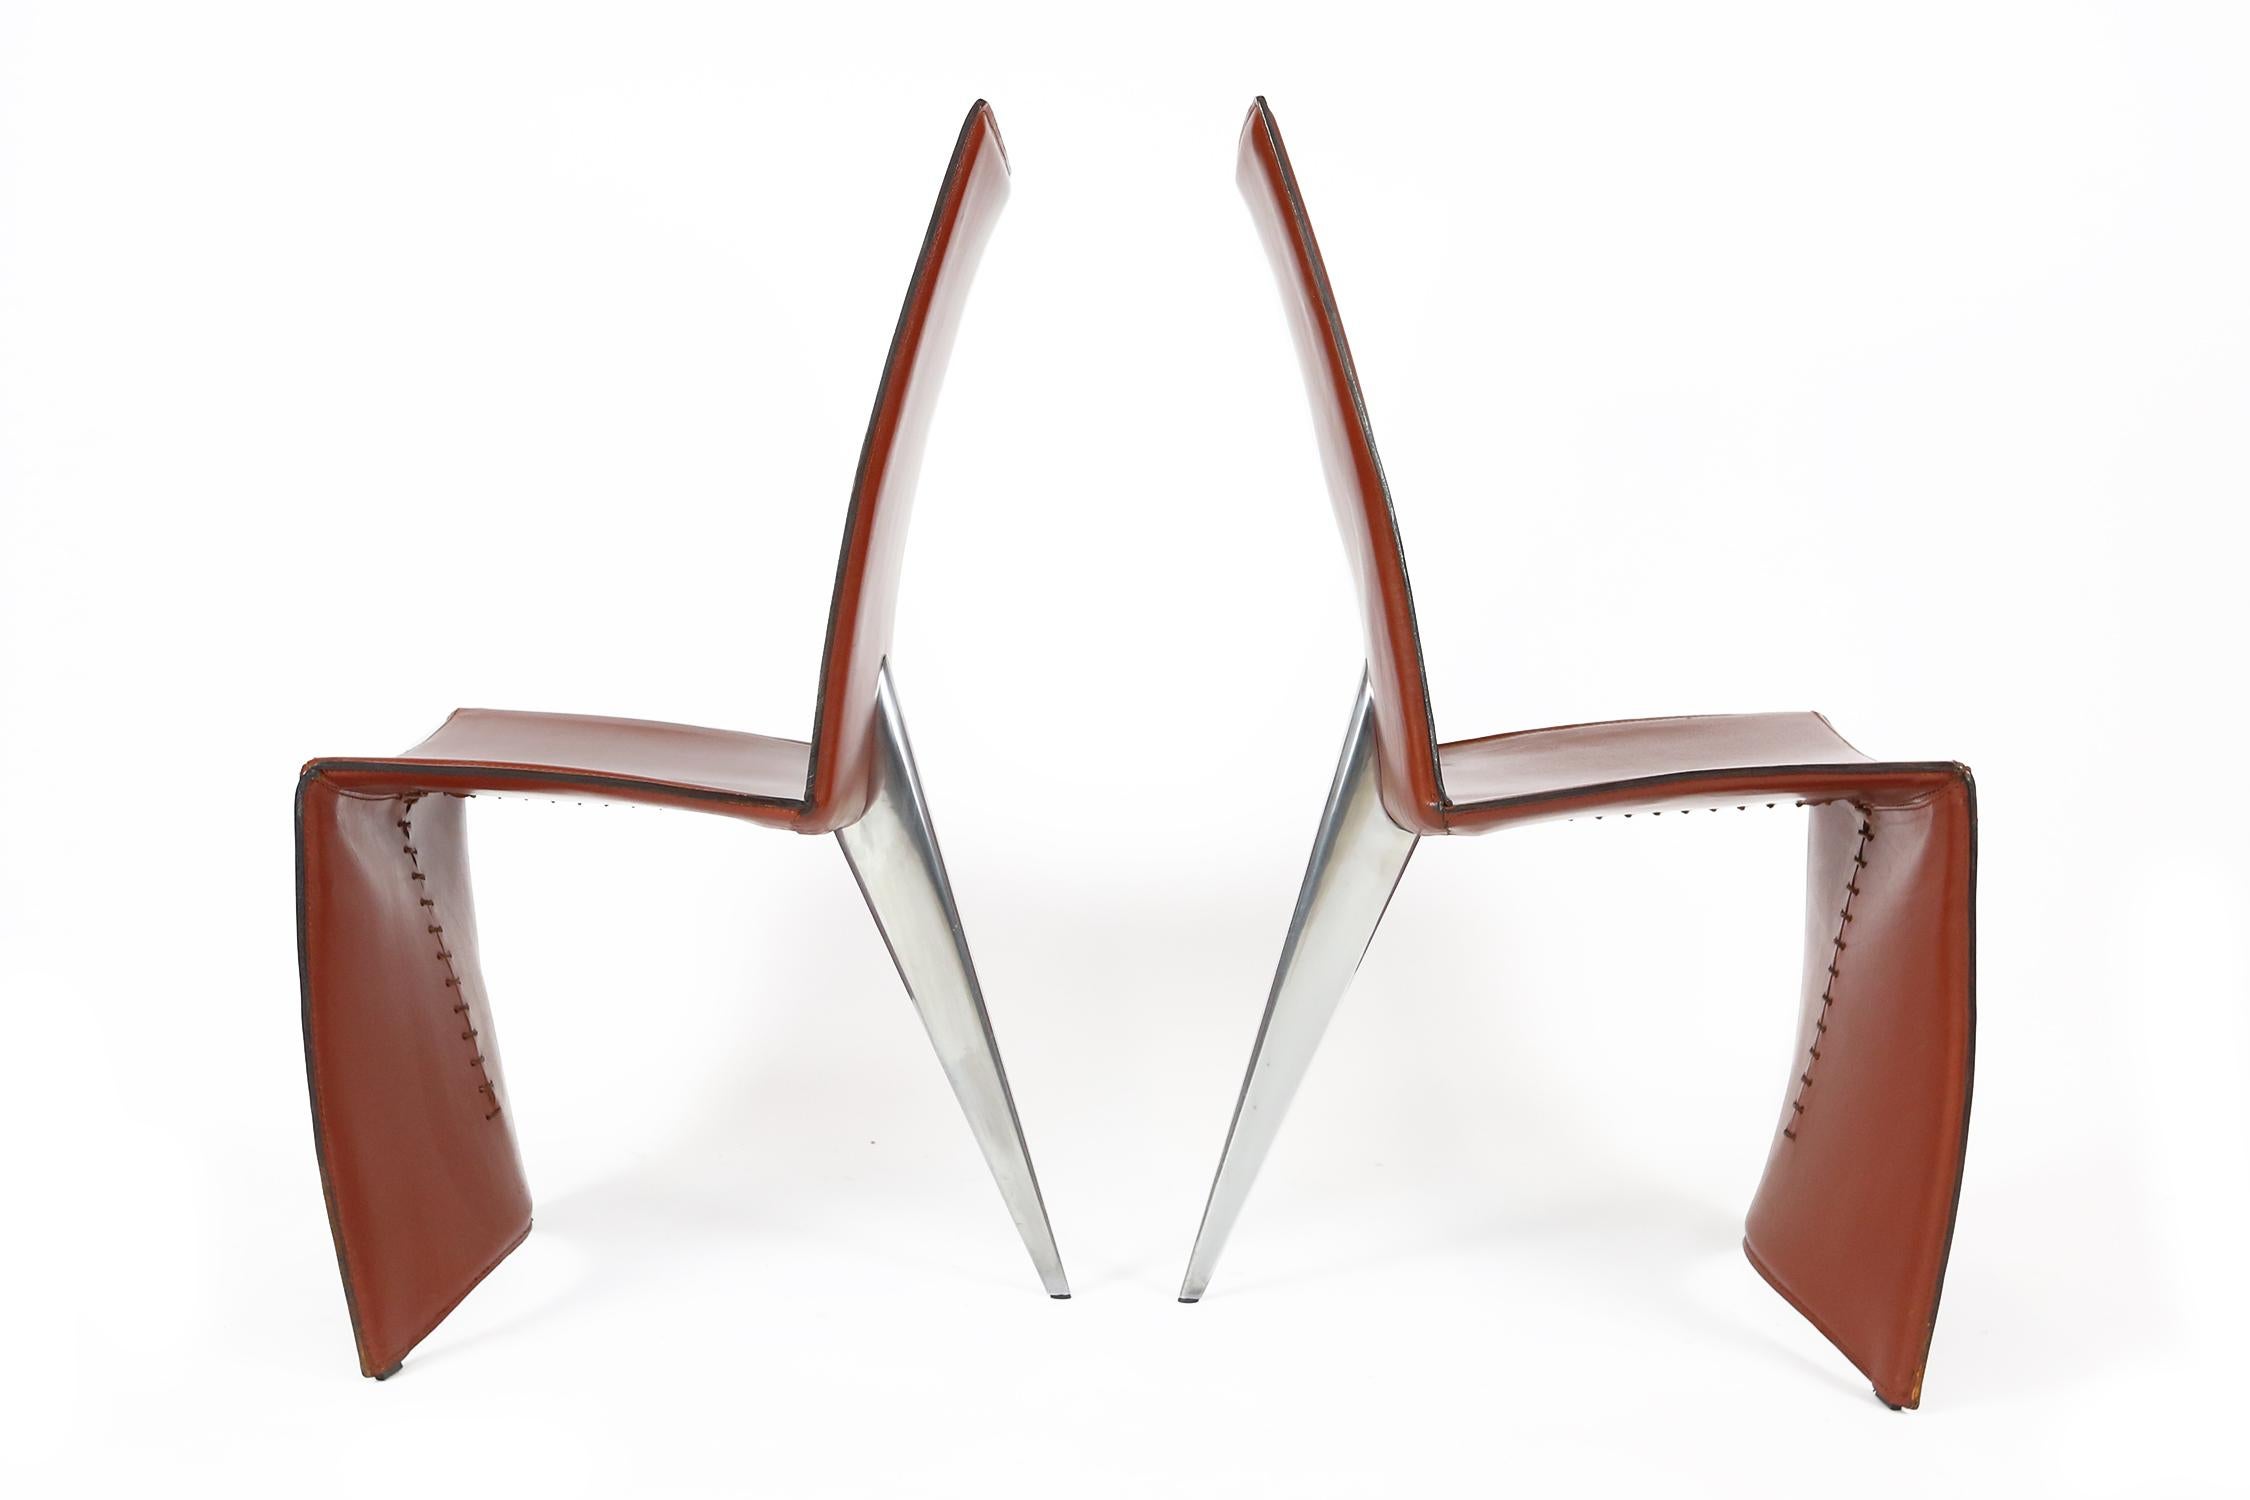 Philippe Starck, Ed Archer model chairs for Driade or Aleph. Design from 1987. Tubular steel design with red-brown calf's leather, polished cast aluminium rear leg.
Although these chairs where bought early 1990s these are pieces with minimal traces